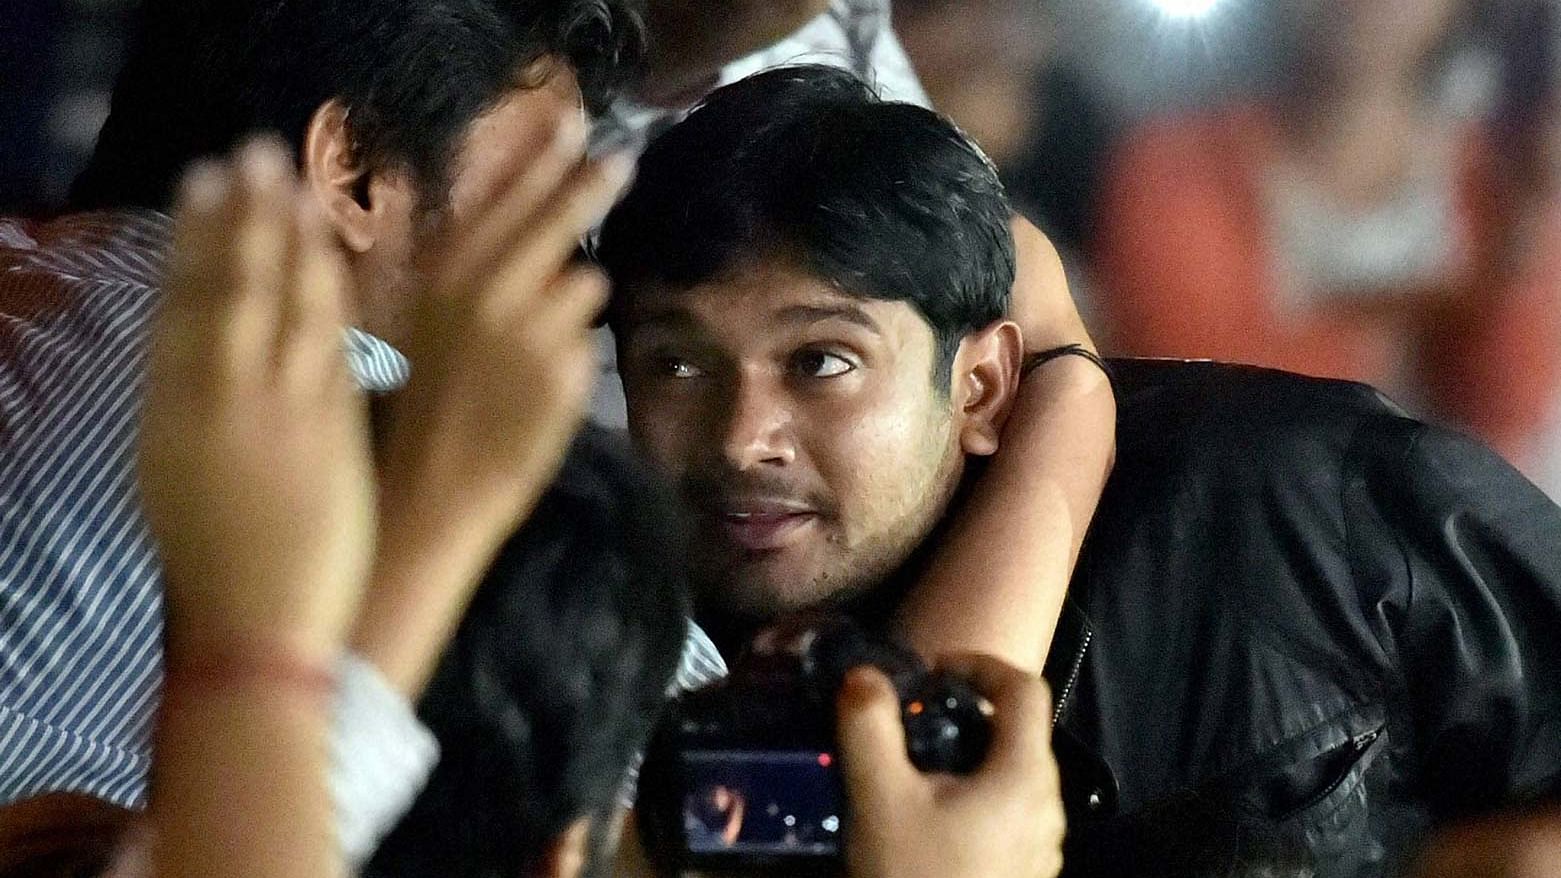 Kanhaiya Kumar, along with 19 other JNU students, have been given show cause notice by the University administration. (Photo: PTI)